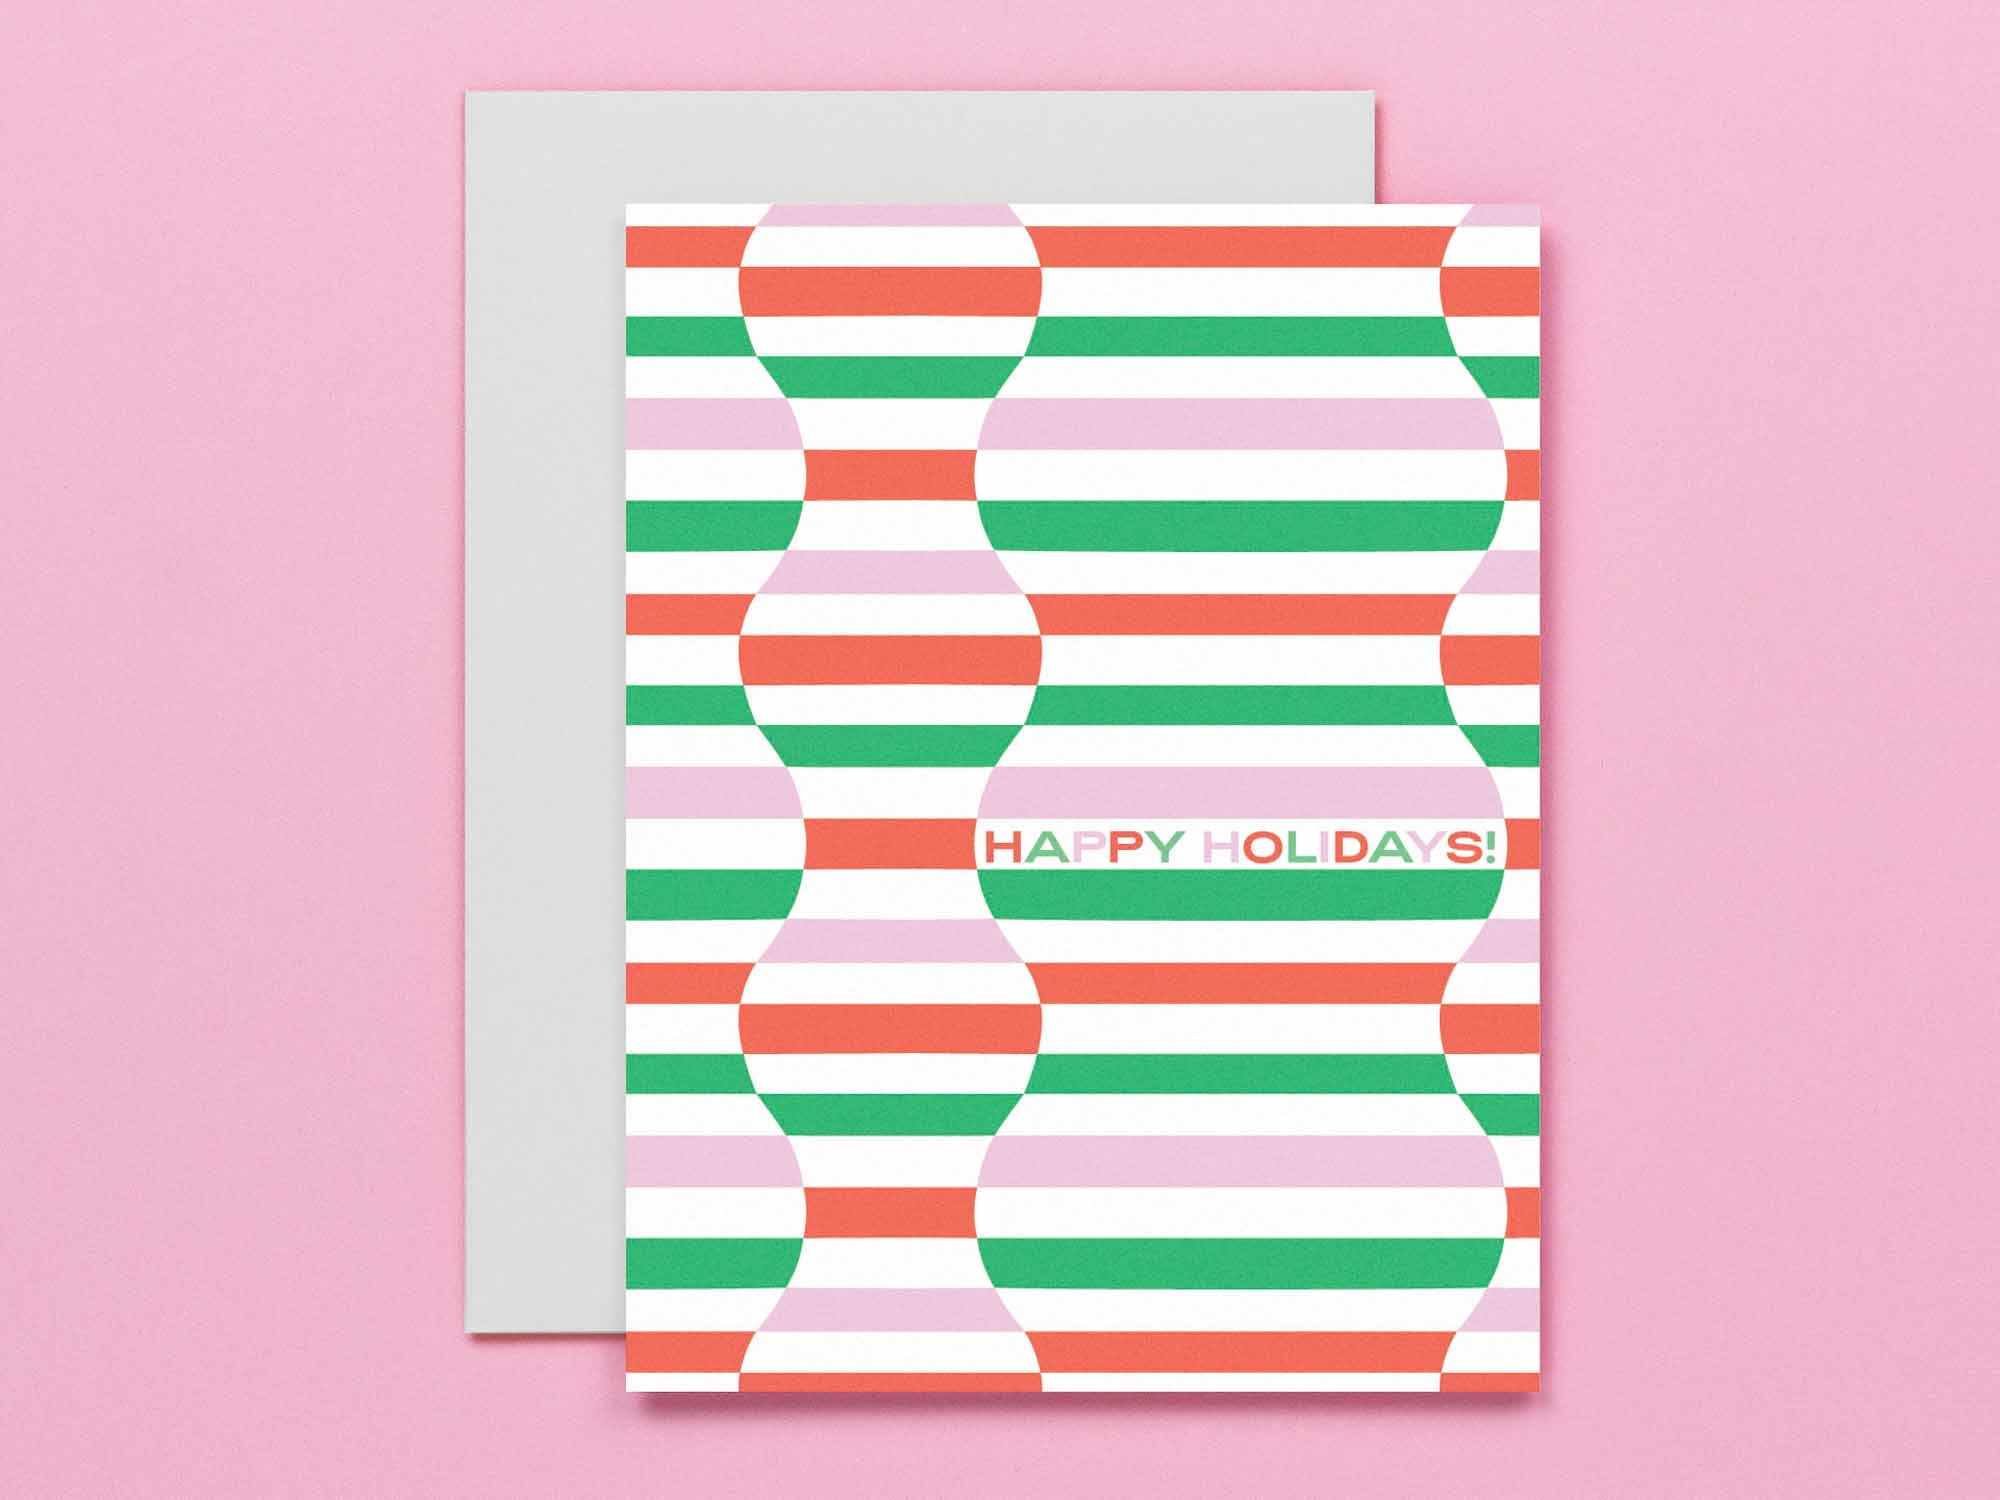 set of 8 vibrant abstract and geometric pattern holiday cards for a hypnotic holiday. Mid-century and op art inspired designs. Made in USA by @mydarlin_bk